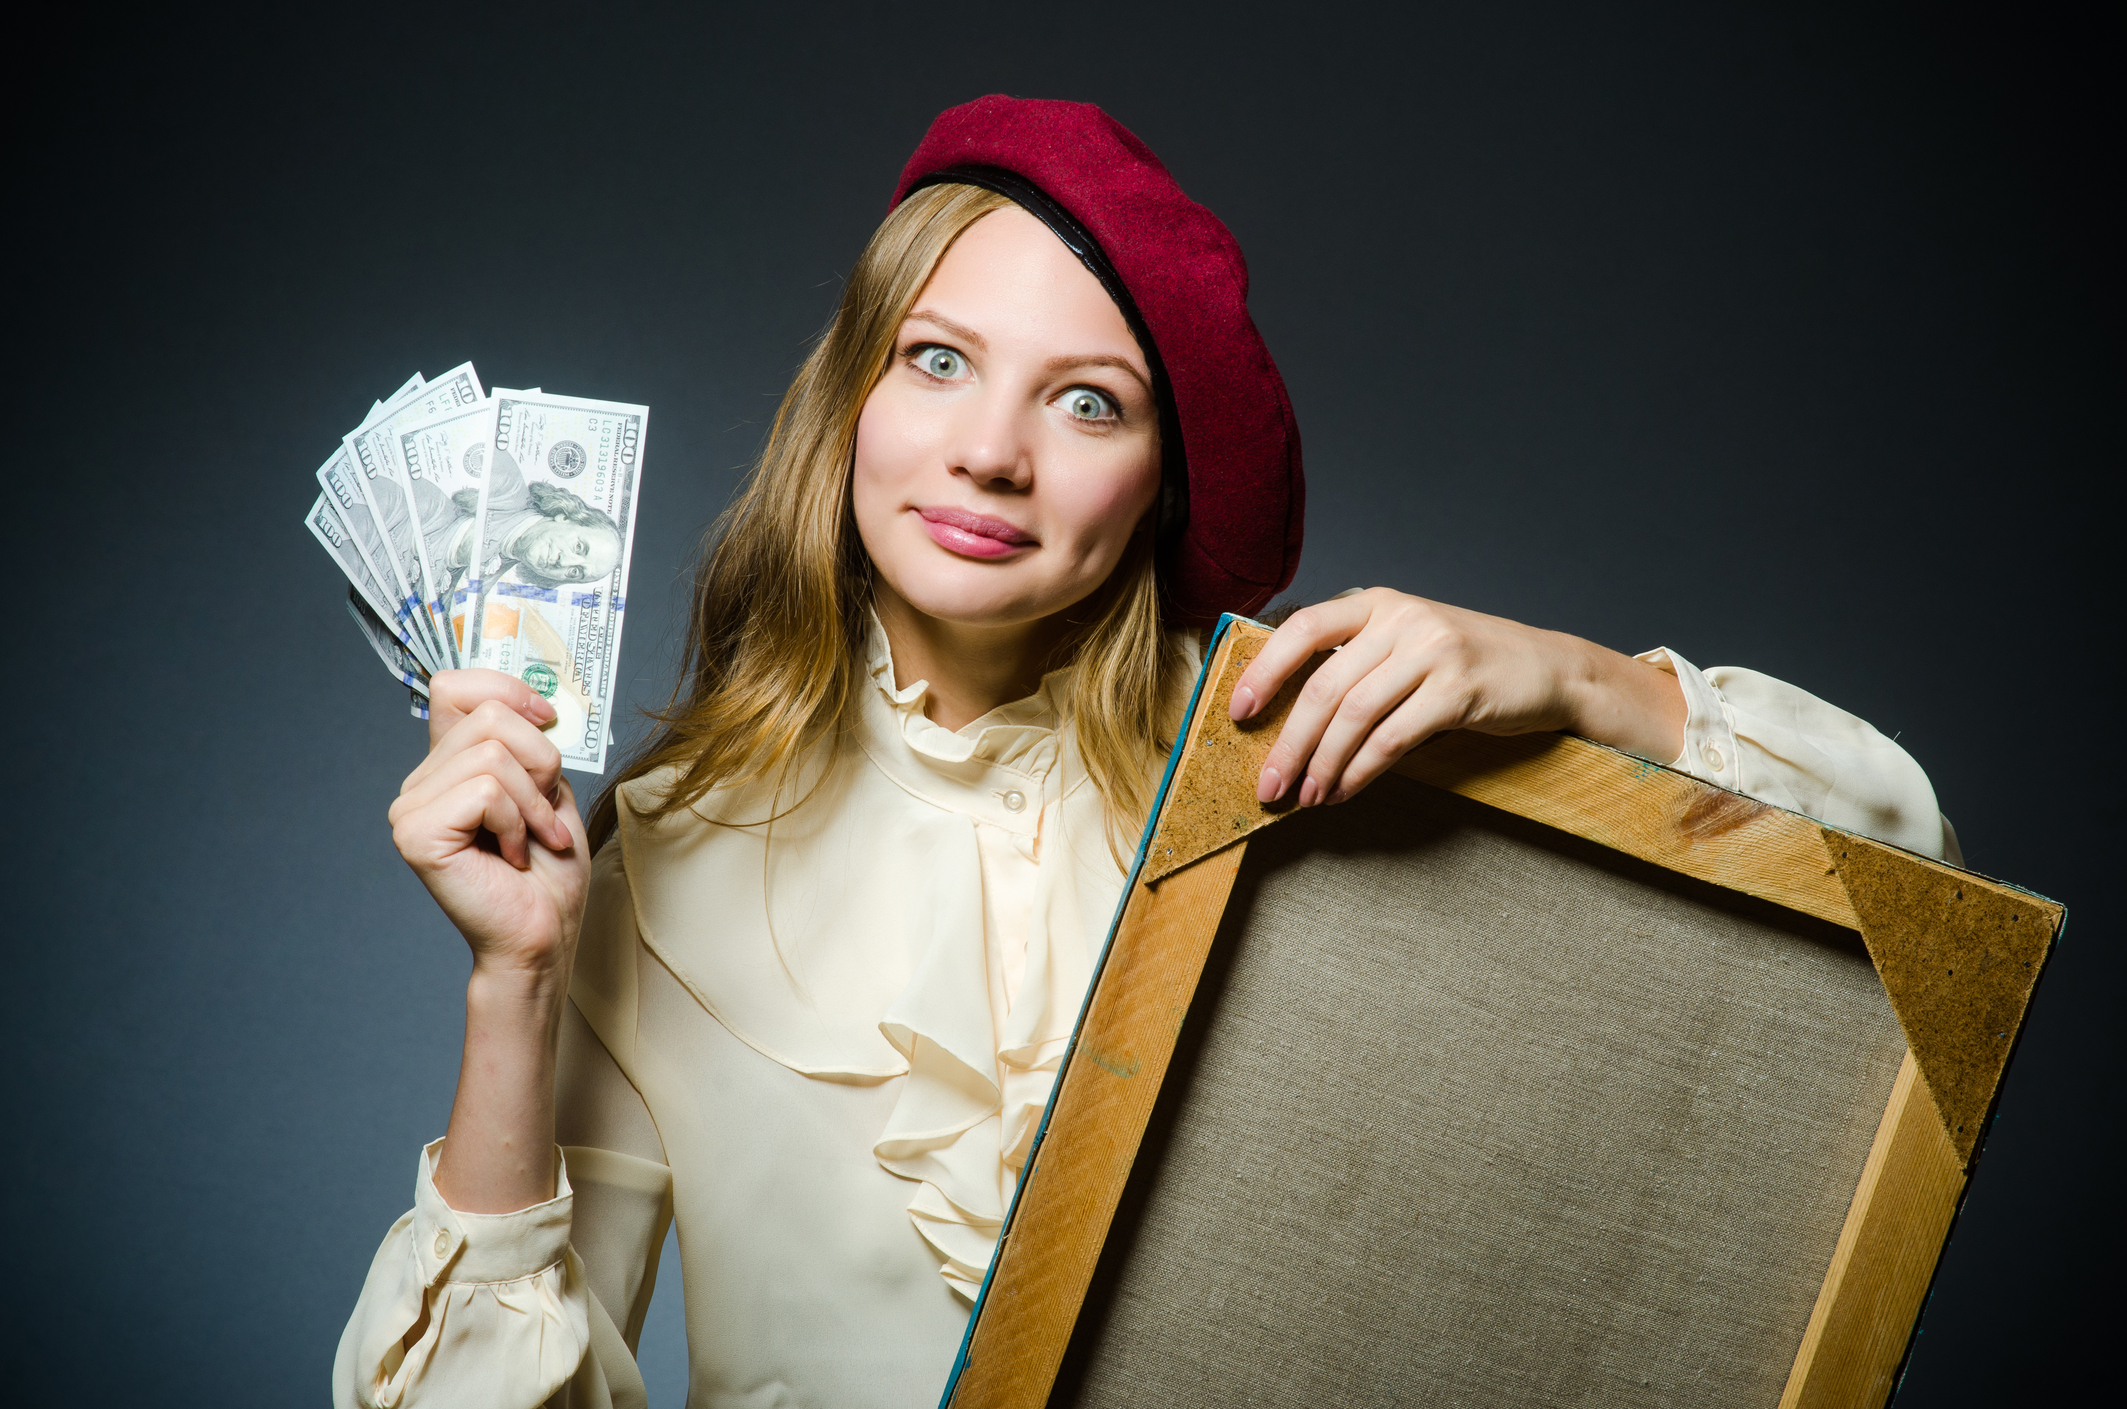 Female artist wearing a beret and holding a canvas in one hand and cash in the other.